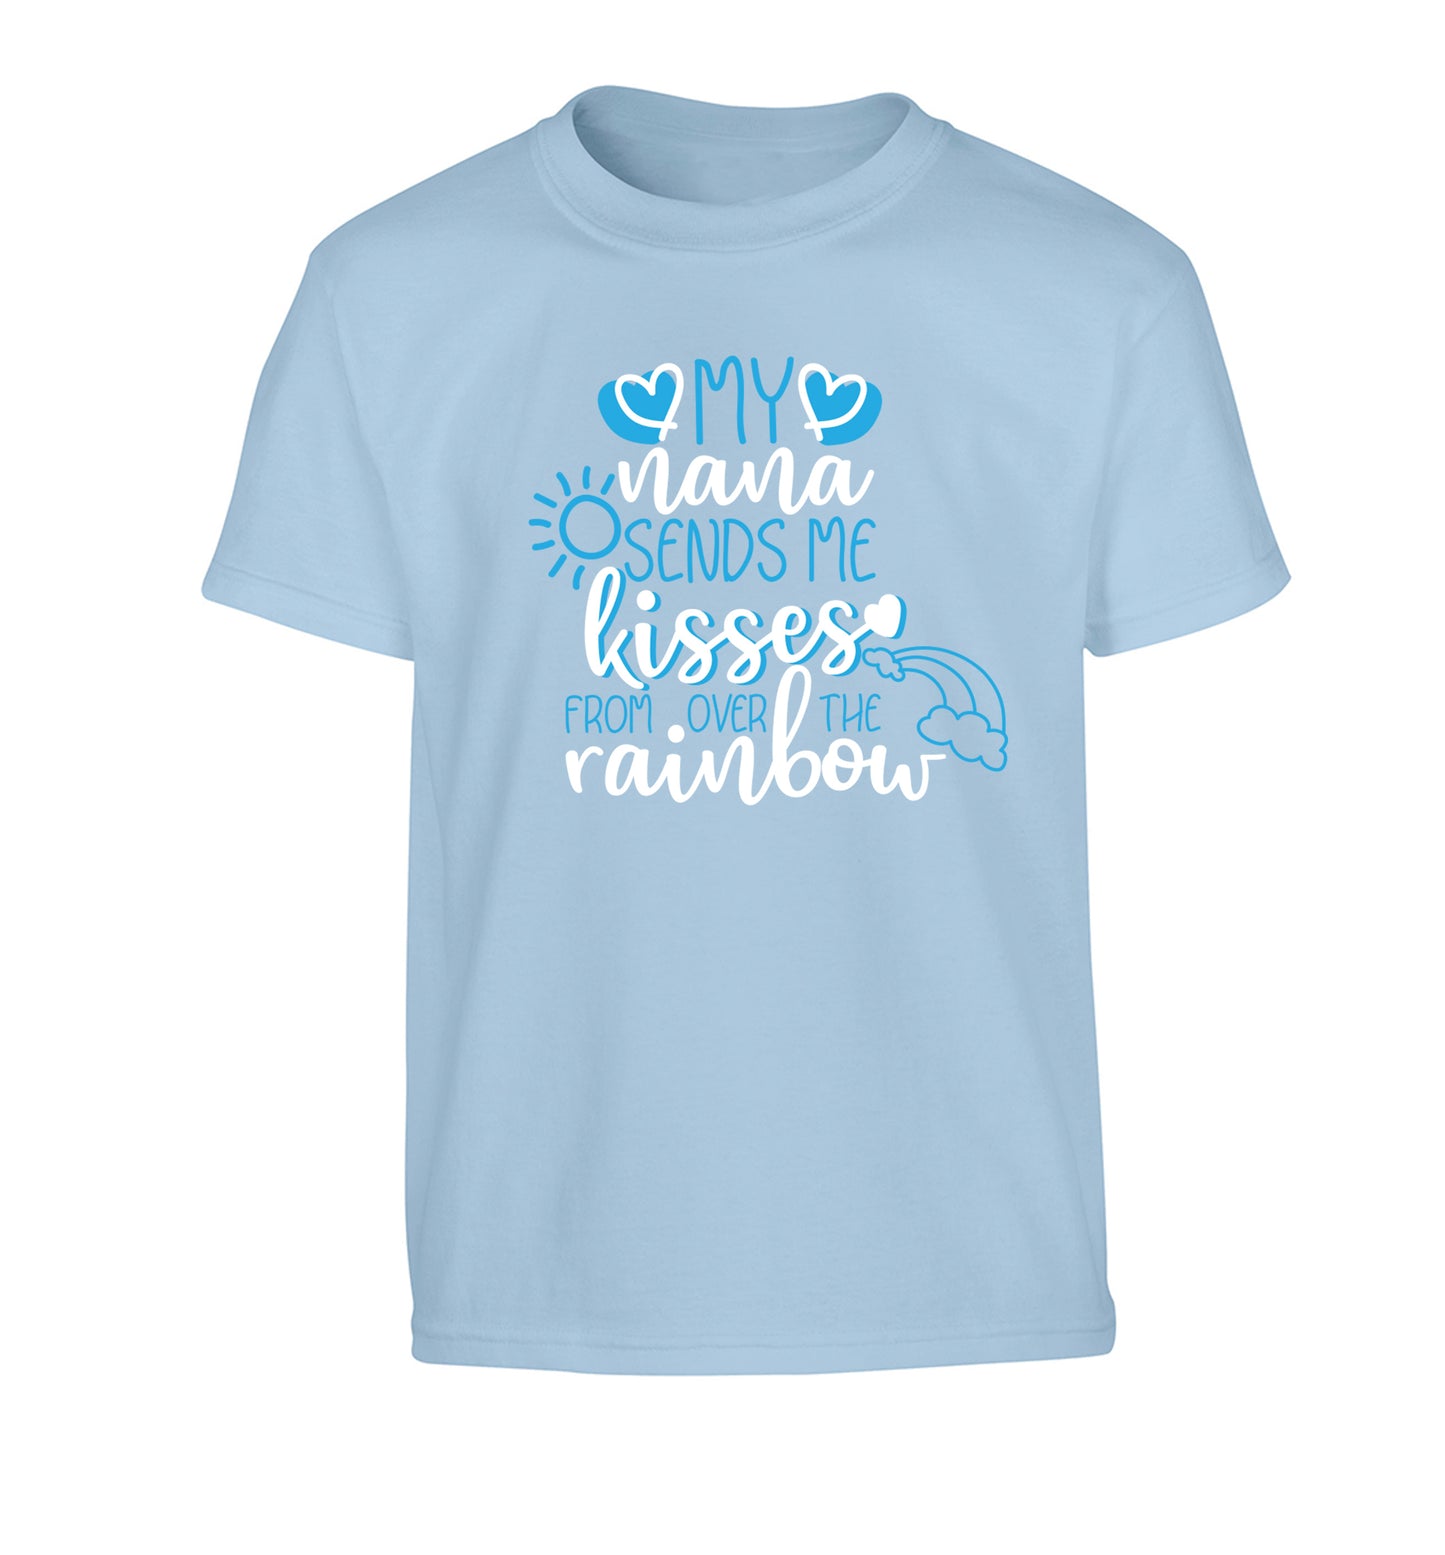 My nana sends me kisses from over the rainbow Children's light blue Tshirt 12-13 Years